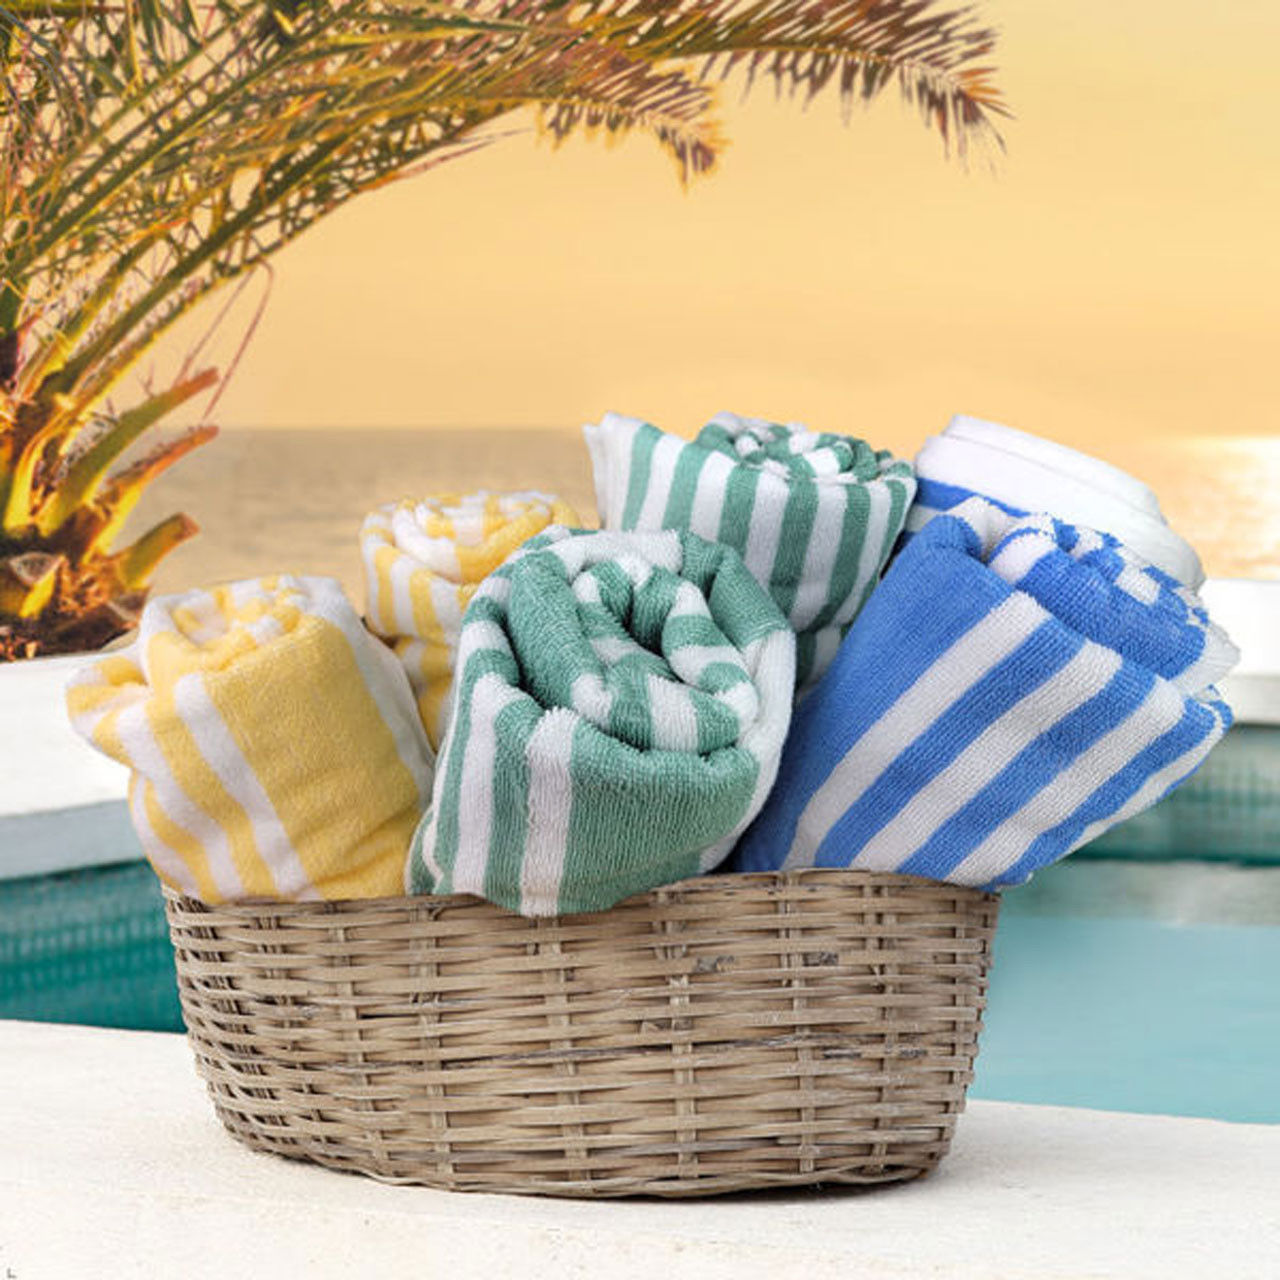 What experience will the Playa Cabana Stripe Bulk Beach Towels add to my customers' beach outing?